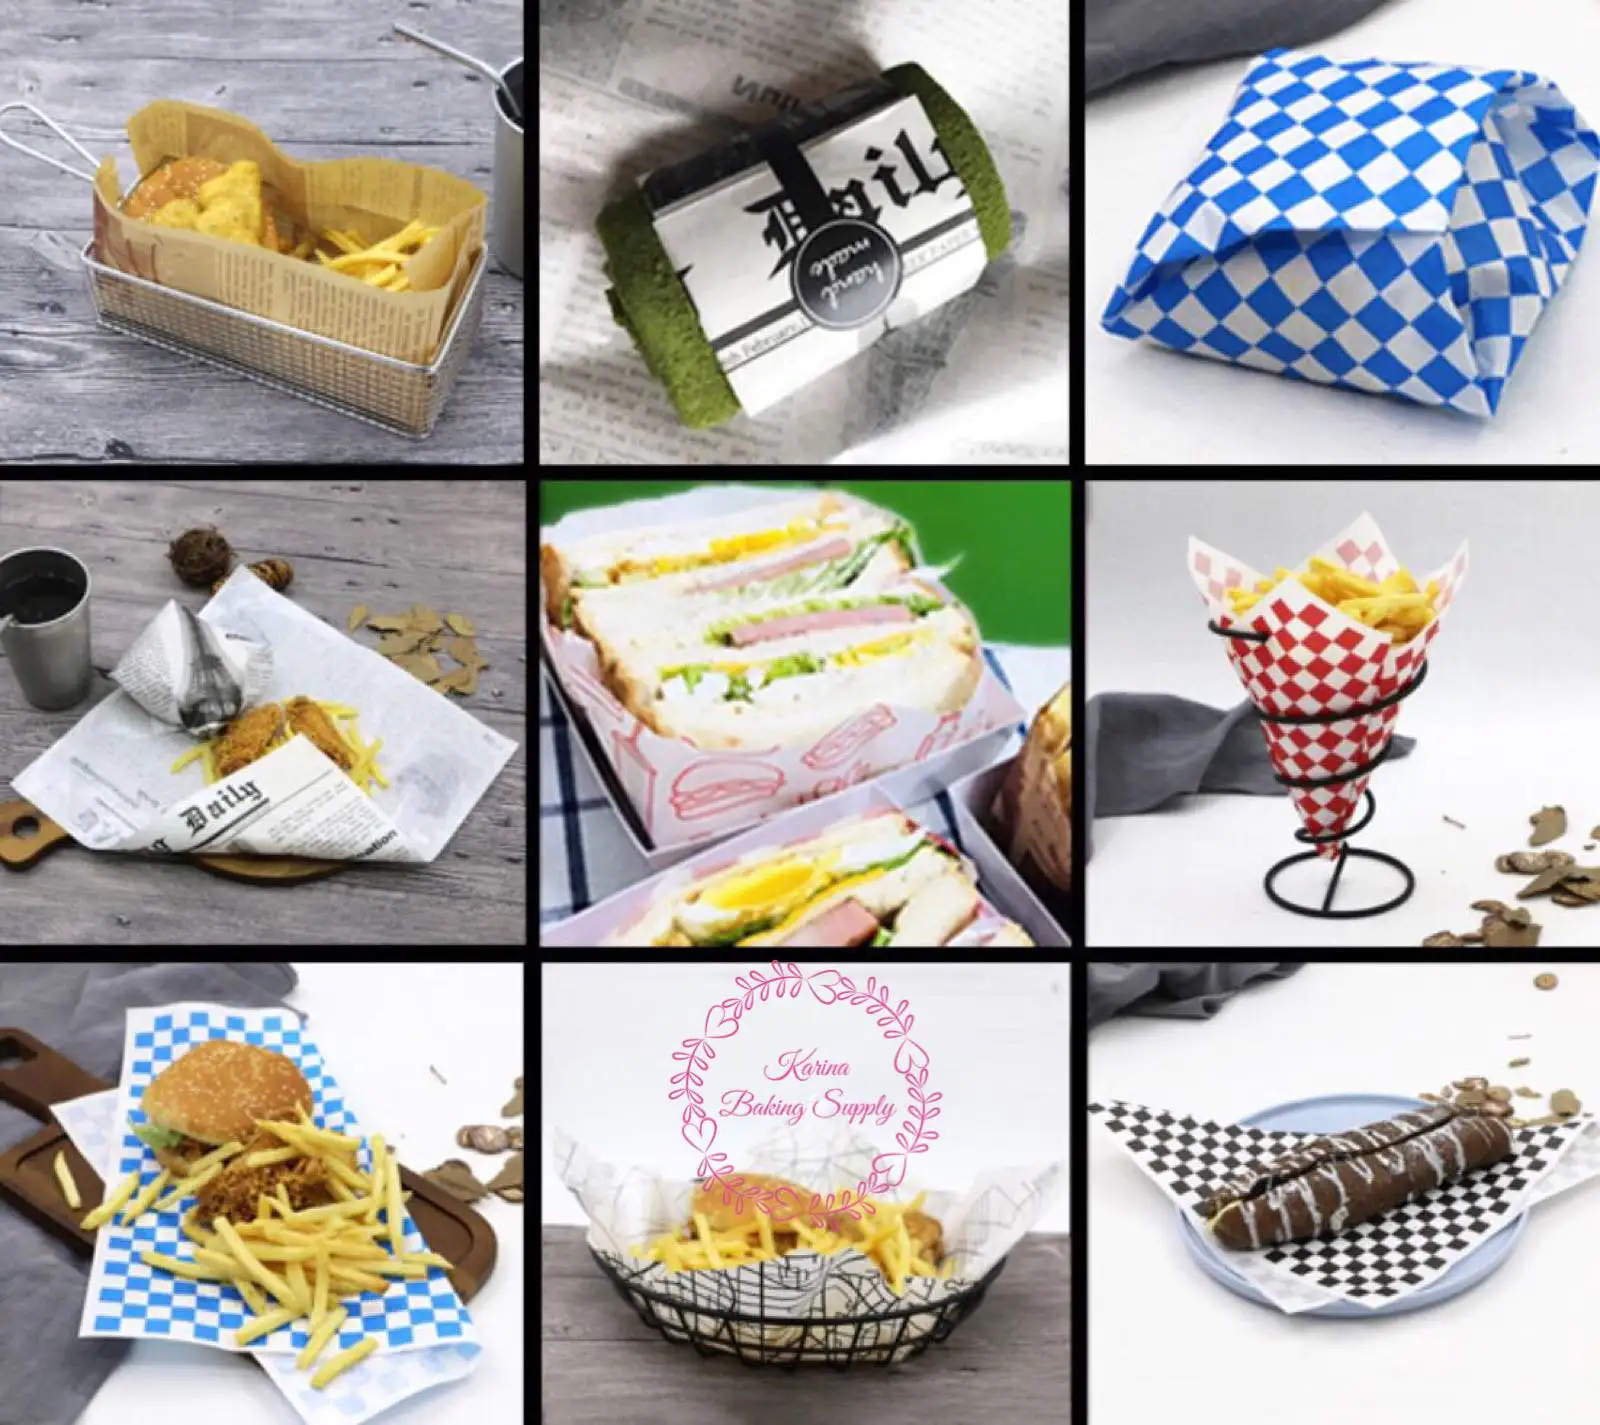 DIrect Factory Price Custom printed 40gsm food greaseproof paper for sandwich packaging